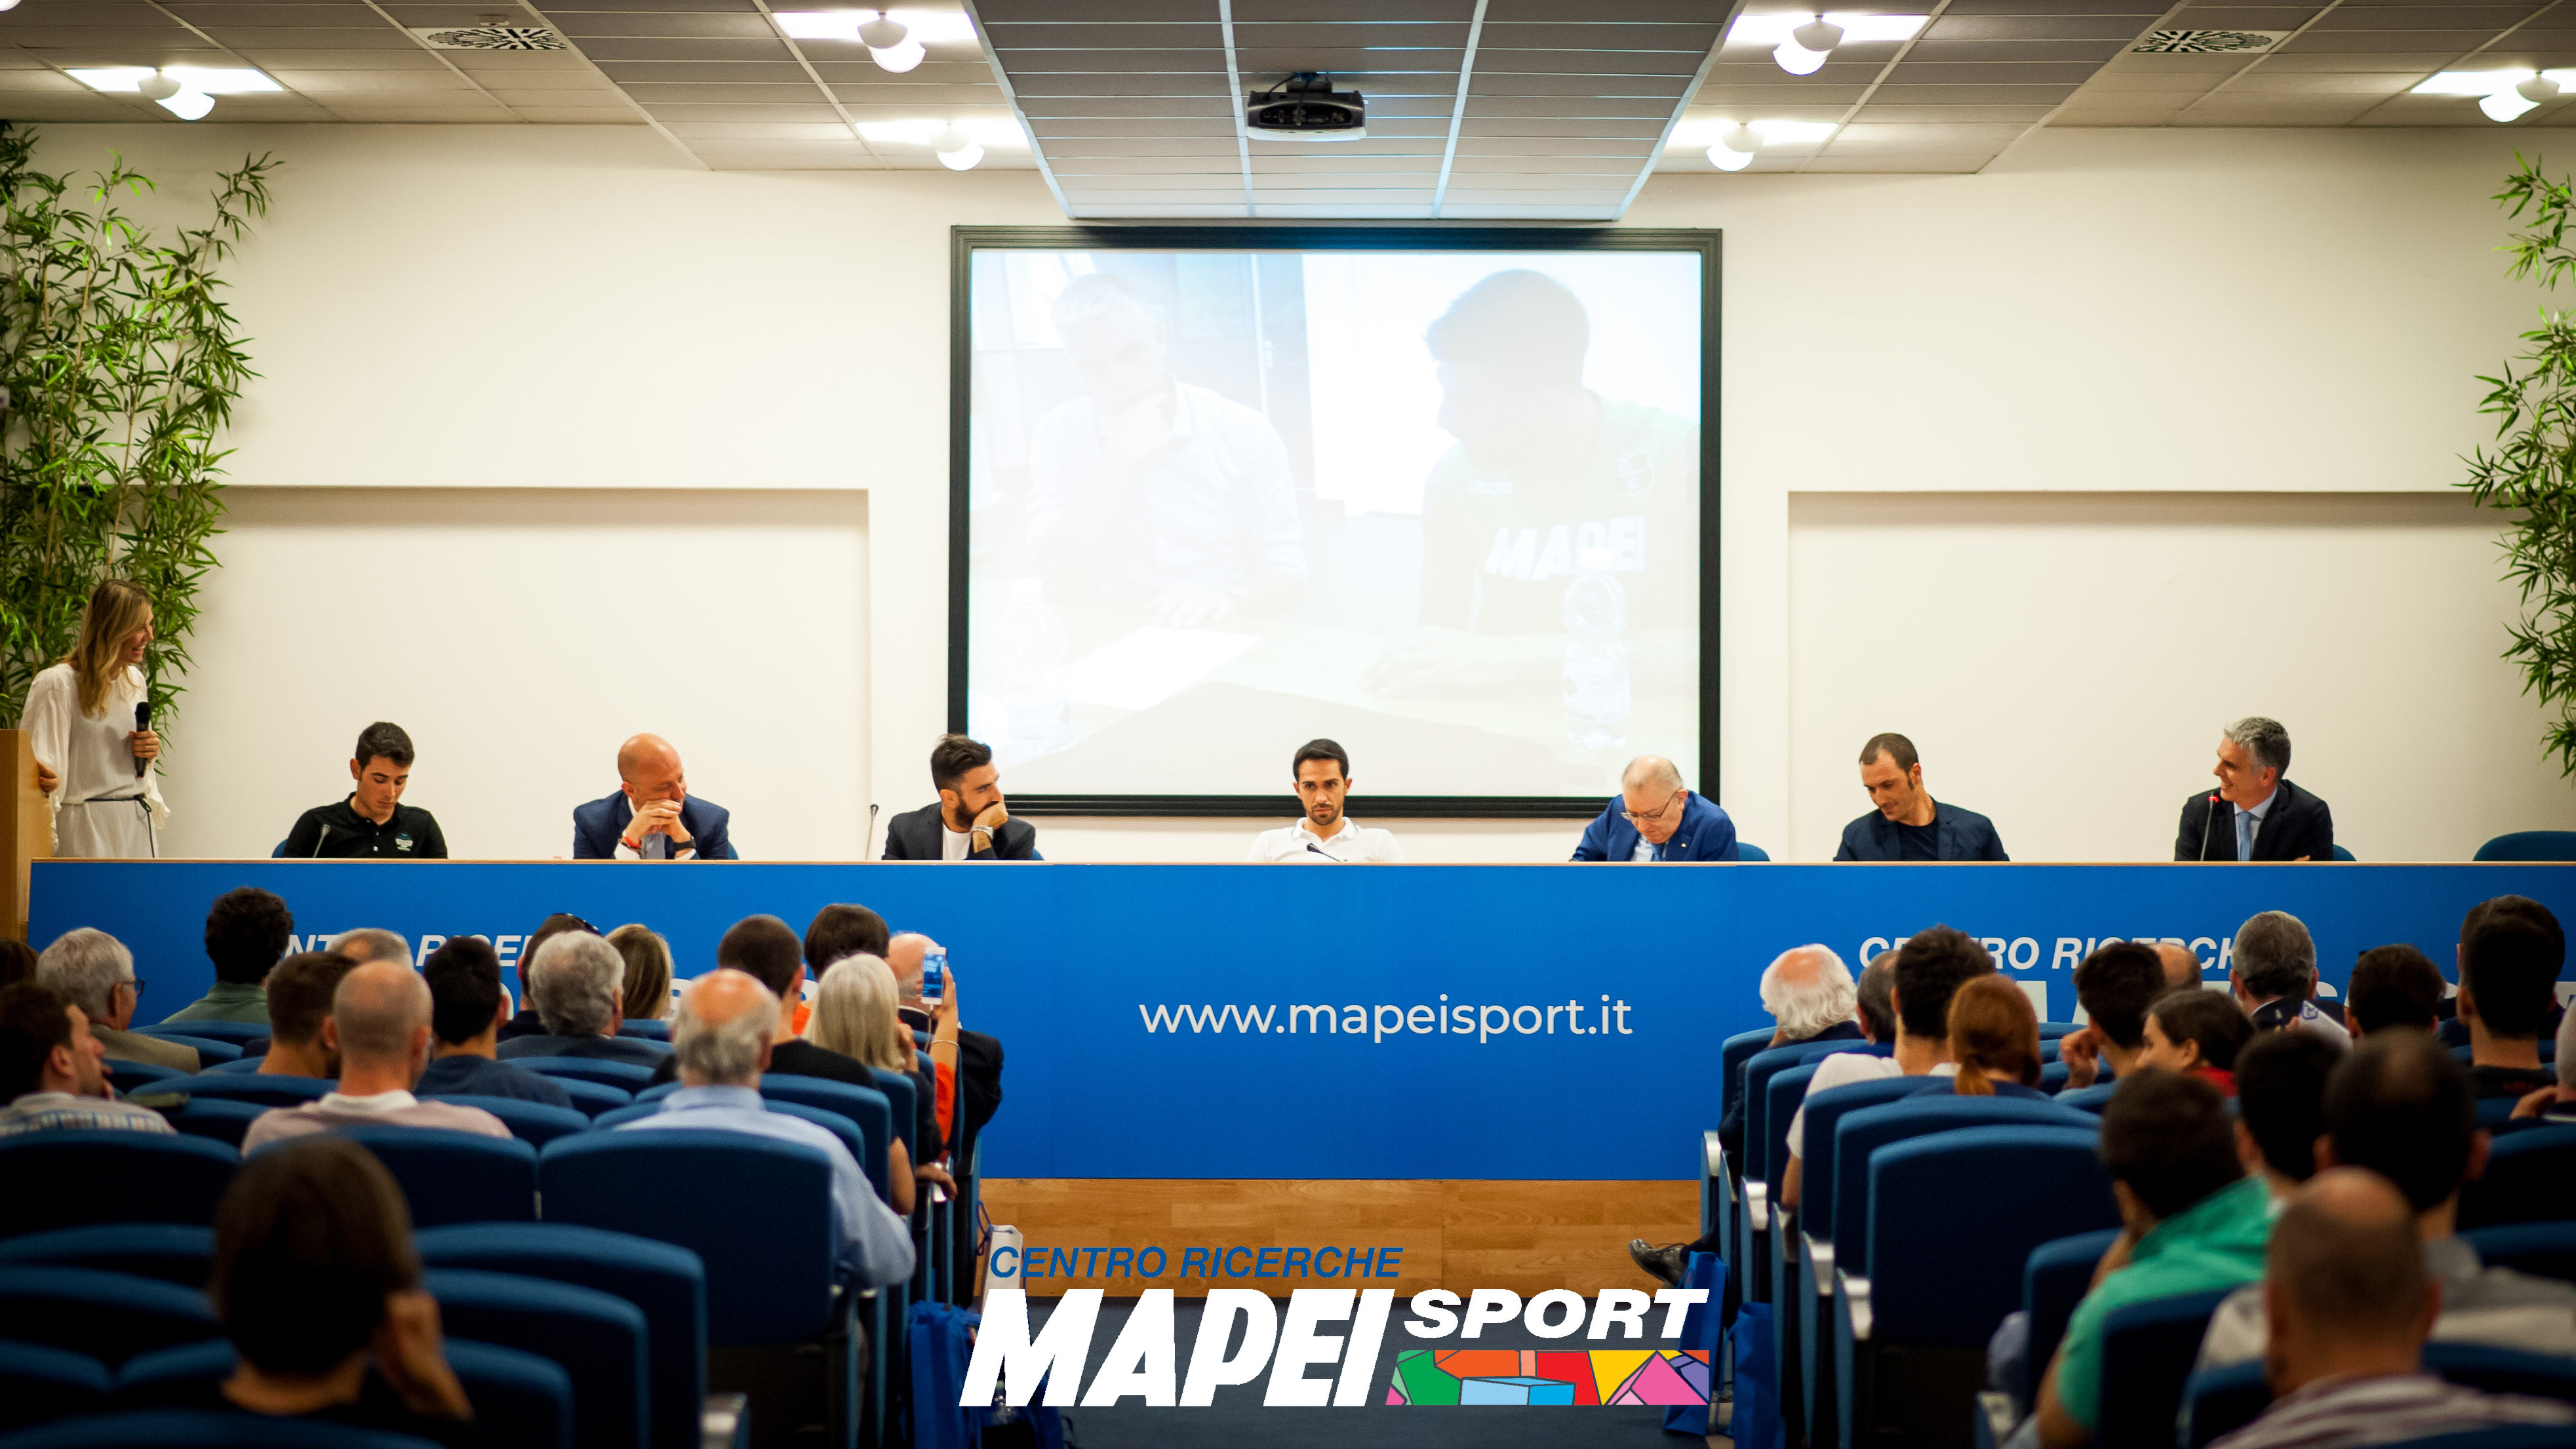 300 PEOPLE TO ATTEND 8th MAPEI SPORT RESEARCH CENTER CONFERENCE - Mapei  Sport